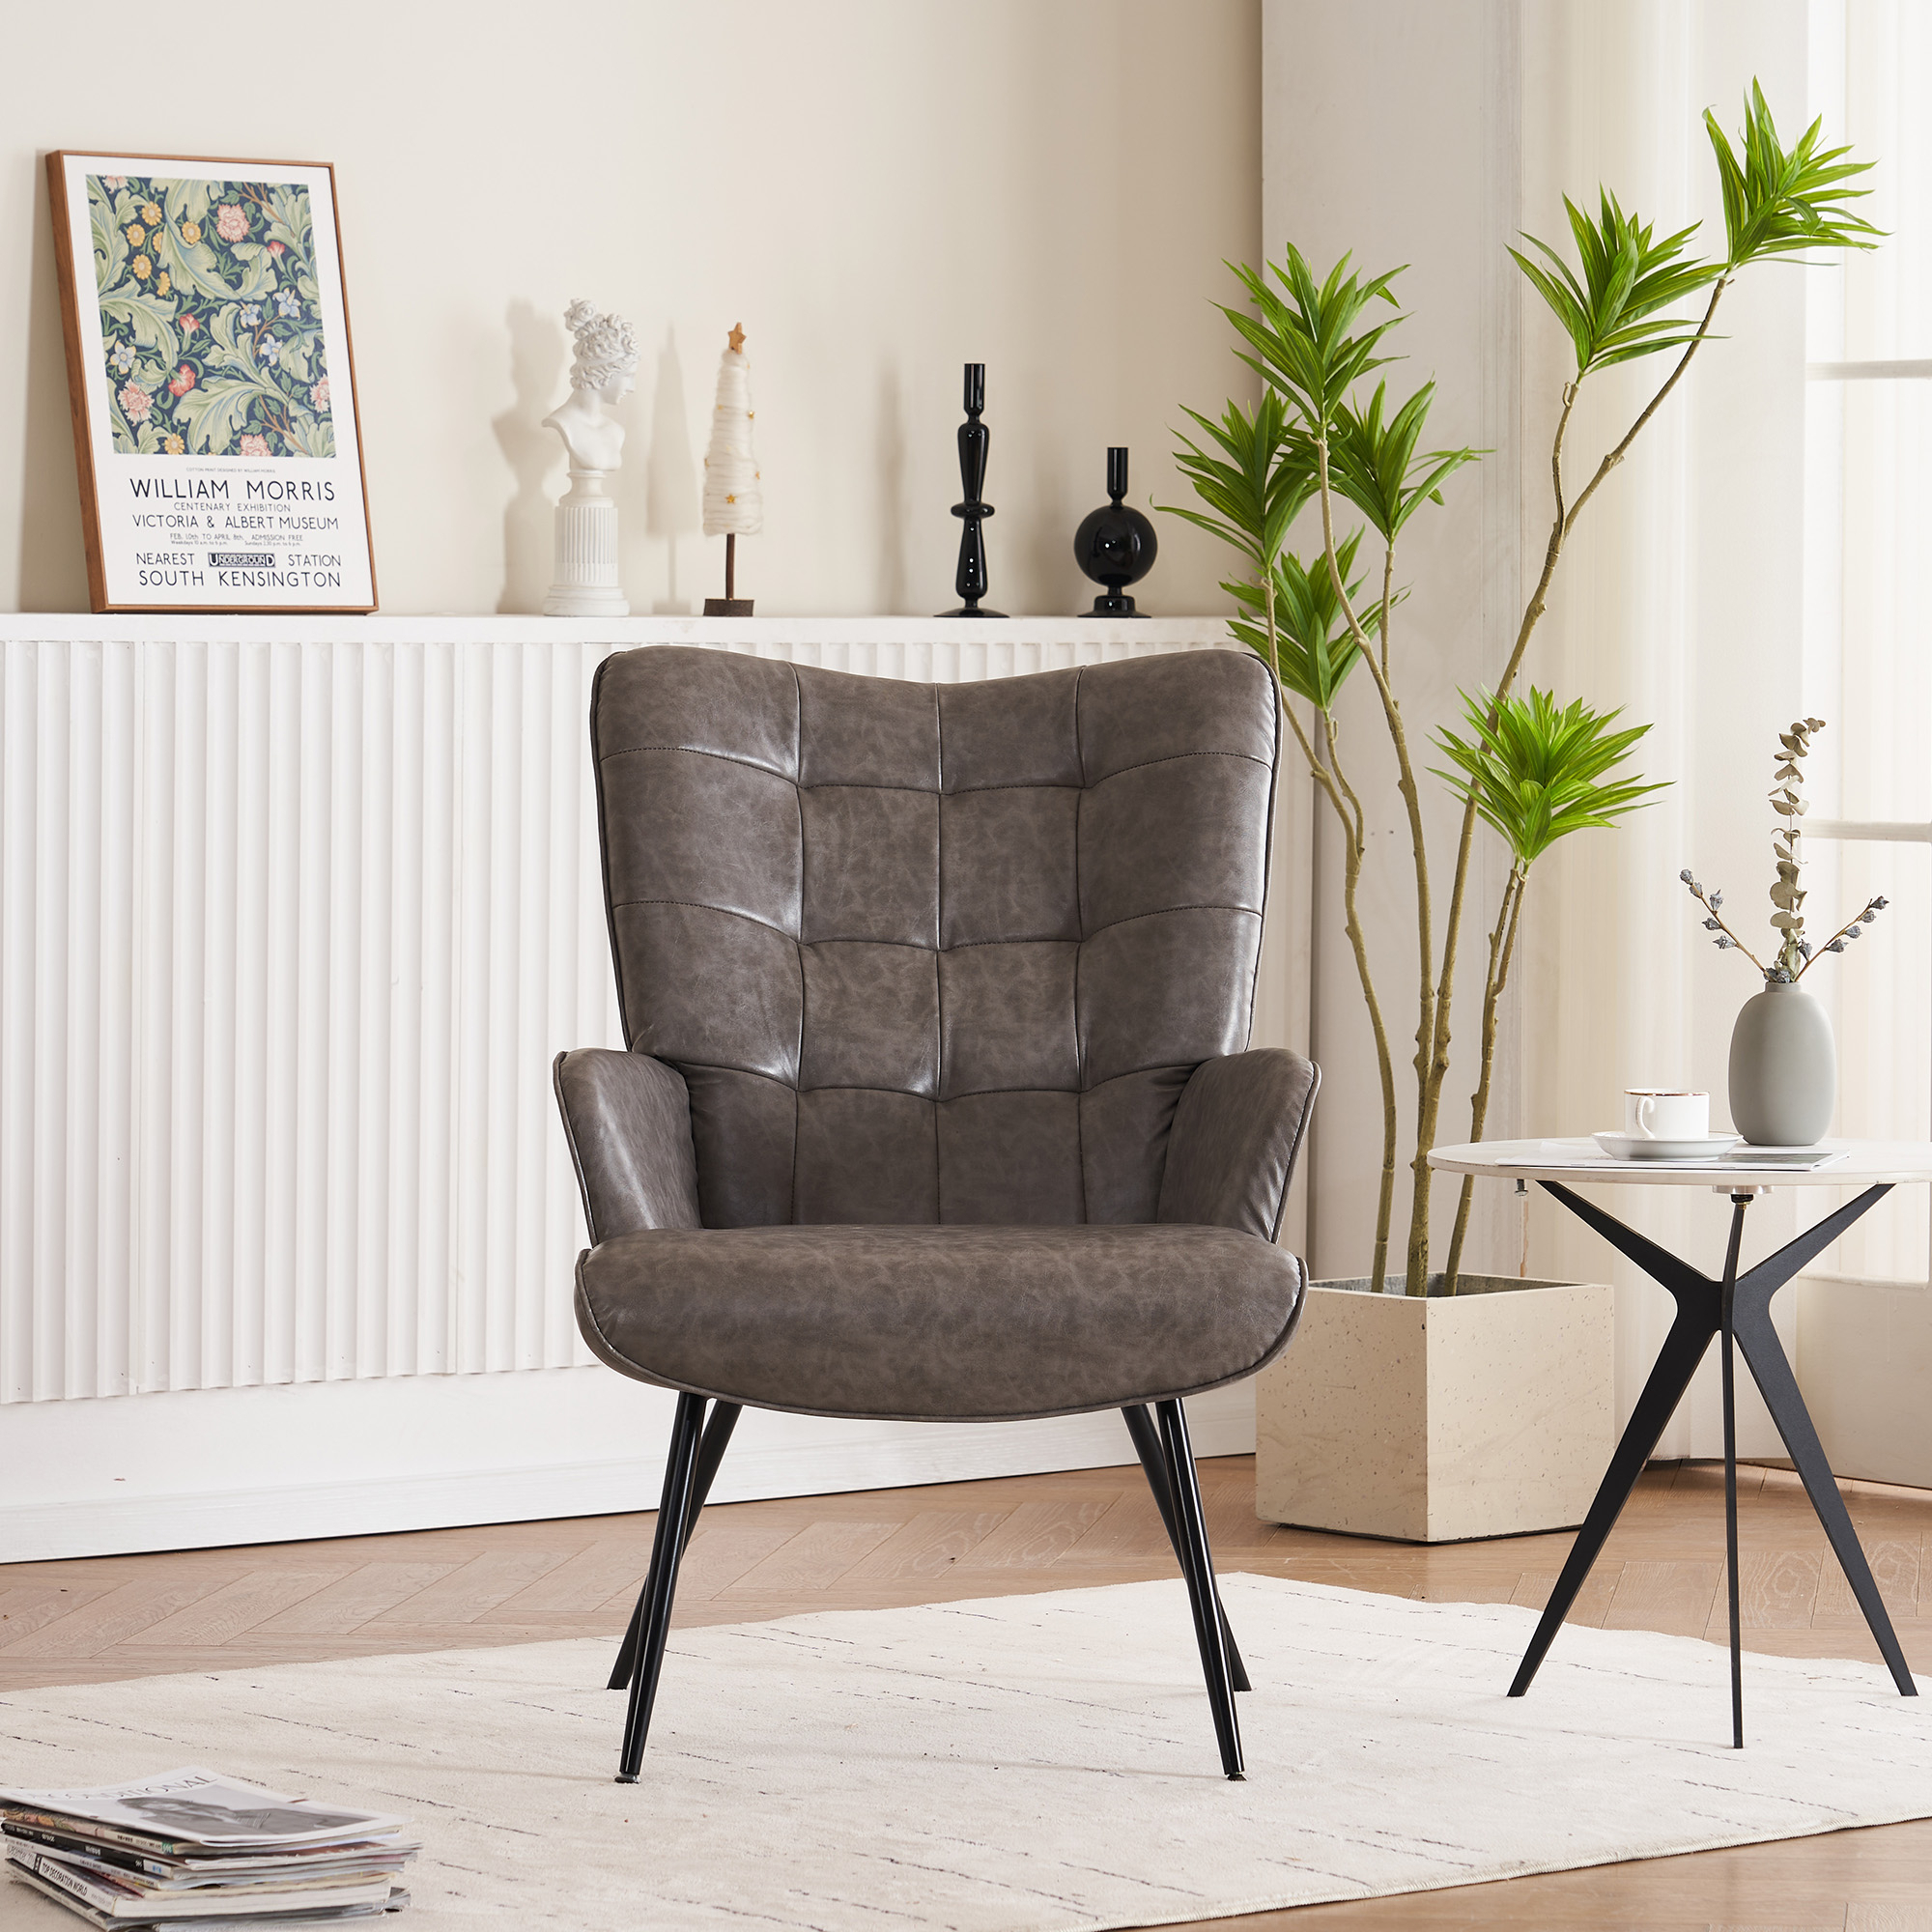 Stylish Contemporary Faux Leather Accent Chair - Perfect For Living Room Decor - Gray